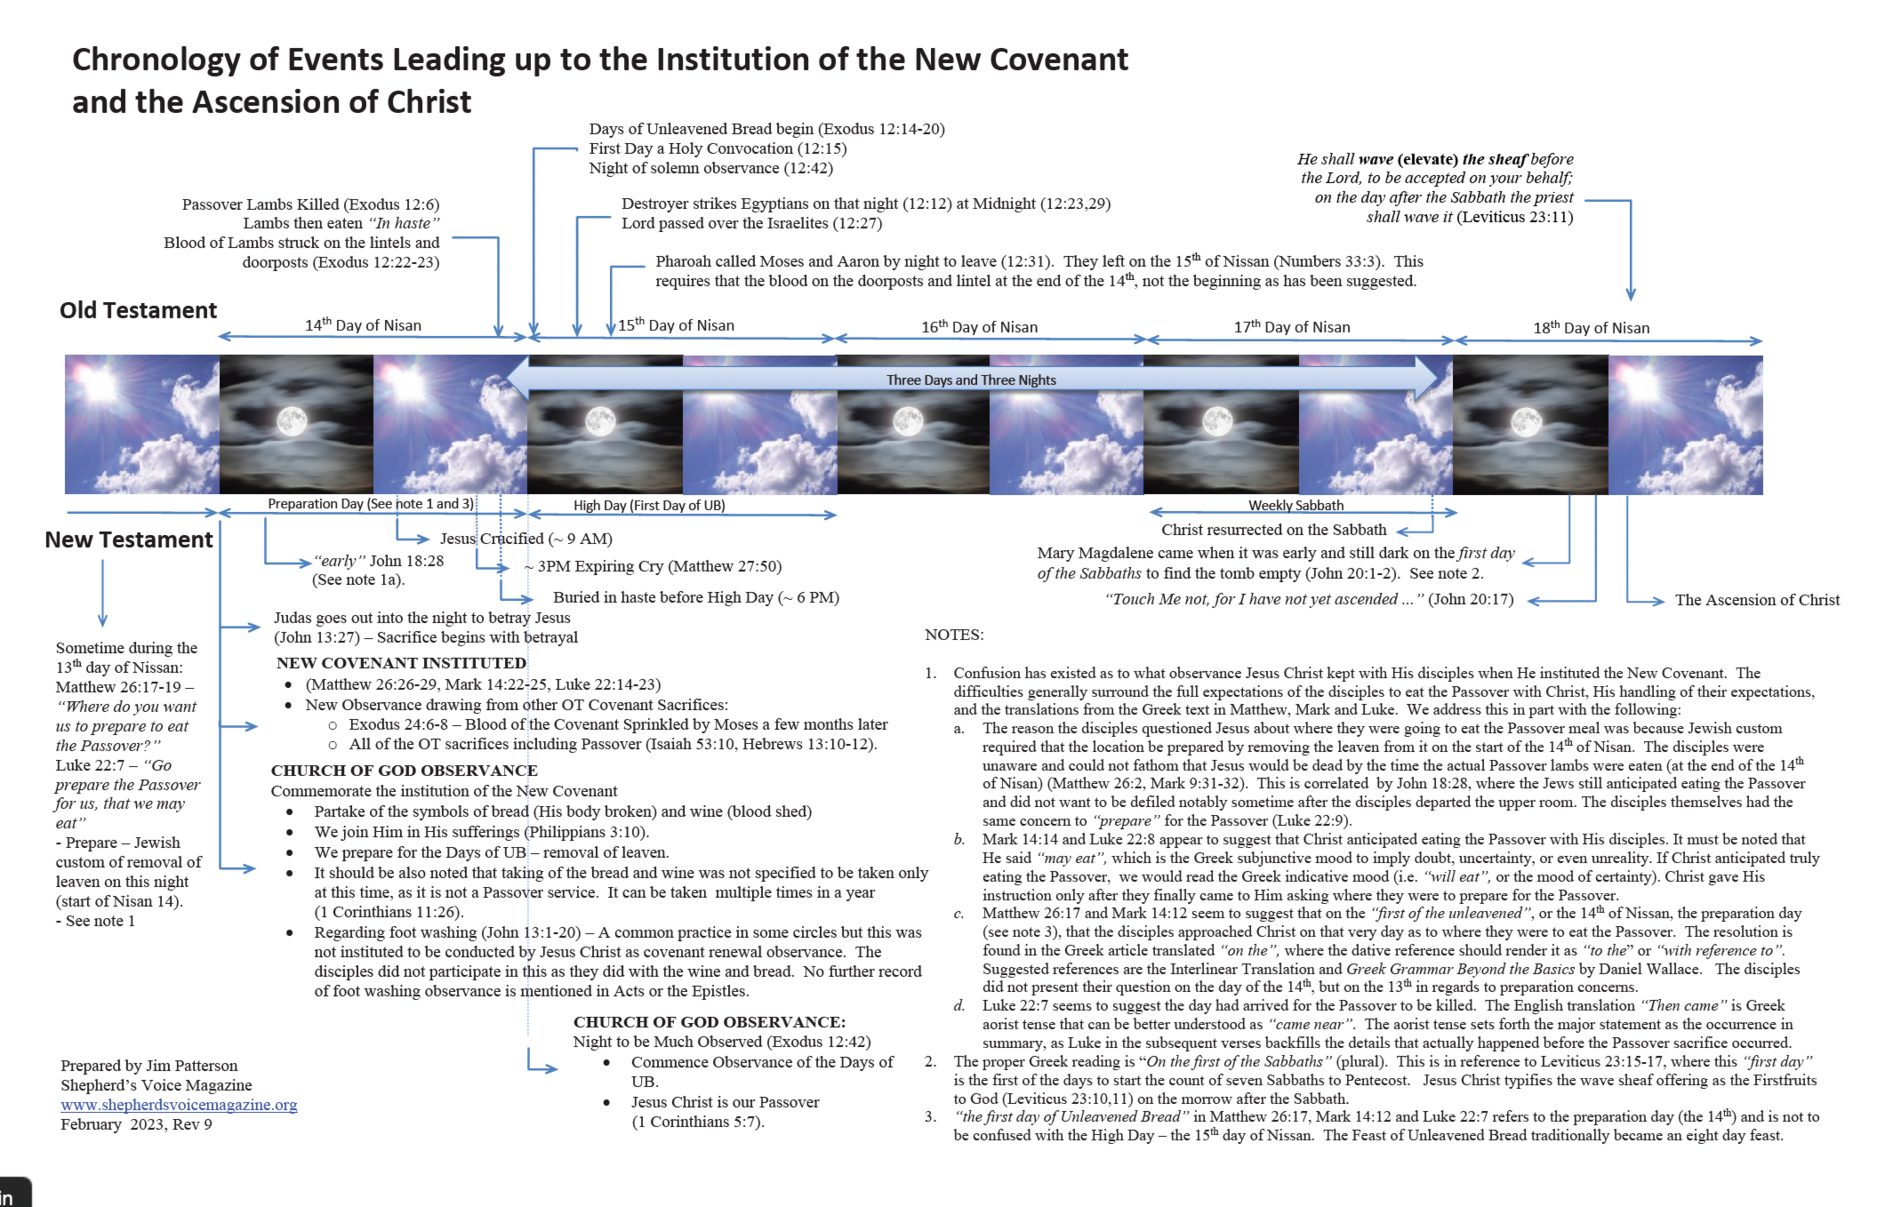 Chronology of Events Leading up to Institution of the New Covenant and the Ascension of Christ